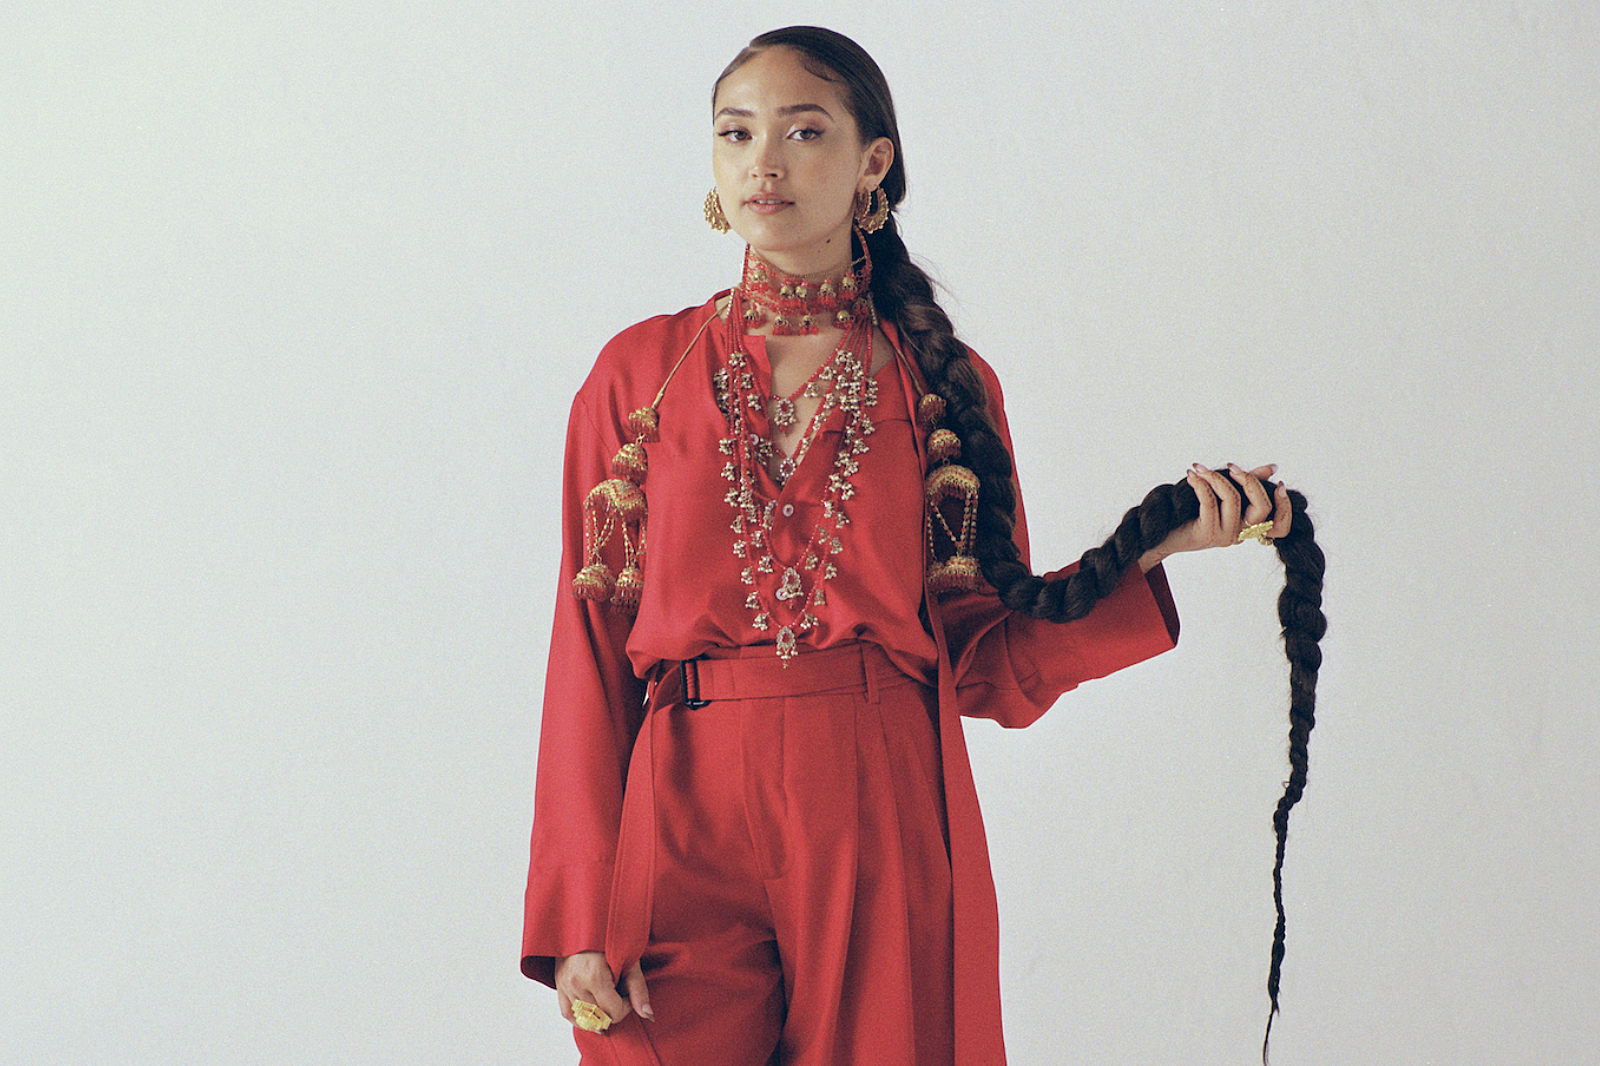 "I just wanted to make something I would be proud of" - Joy Crookes reflects on her debut 'Skin'